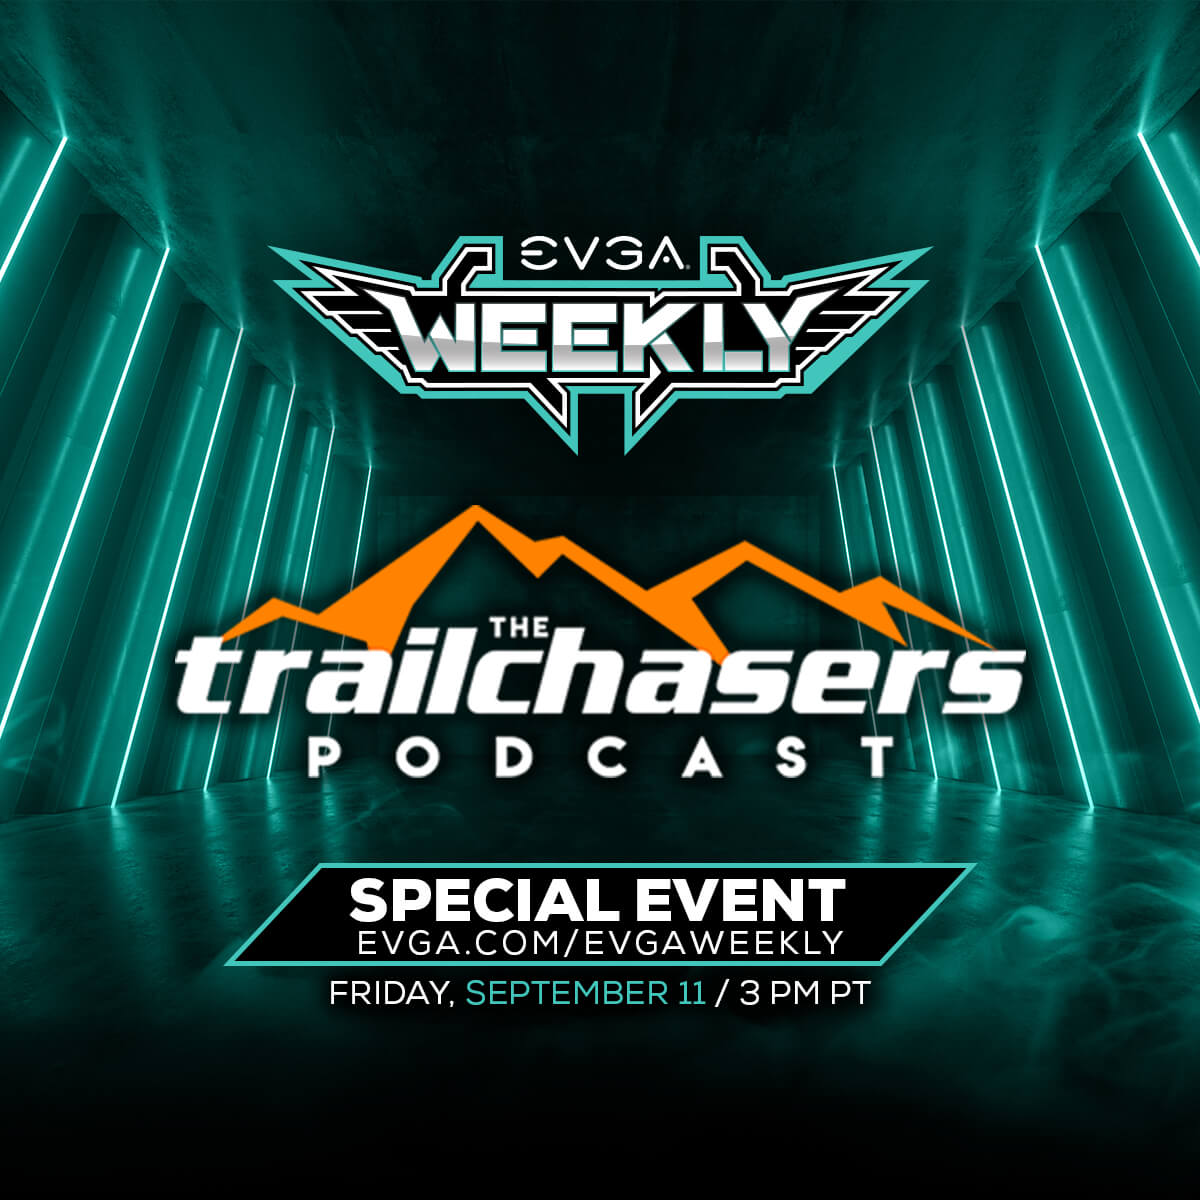 online contests, sweepstakes and giveaways - EVGA - Articles - EVGA Weekly Live Stream with Trailchasers